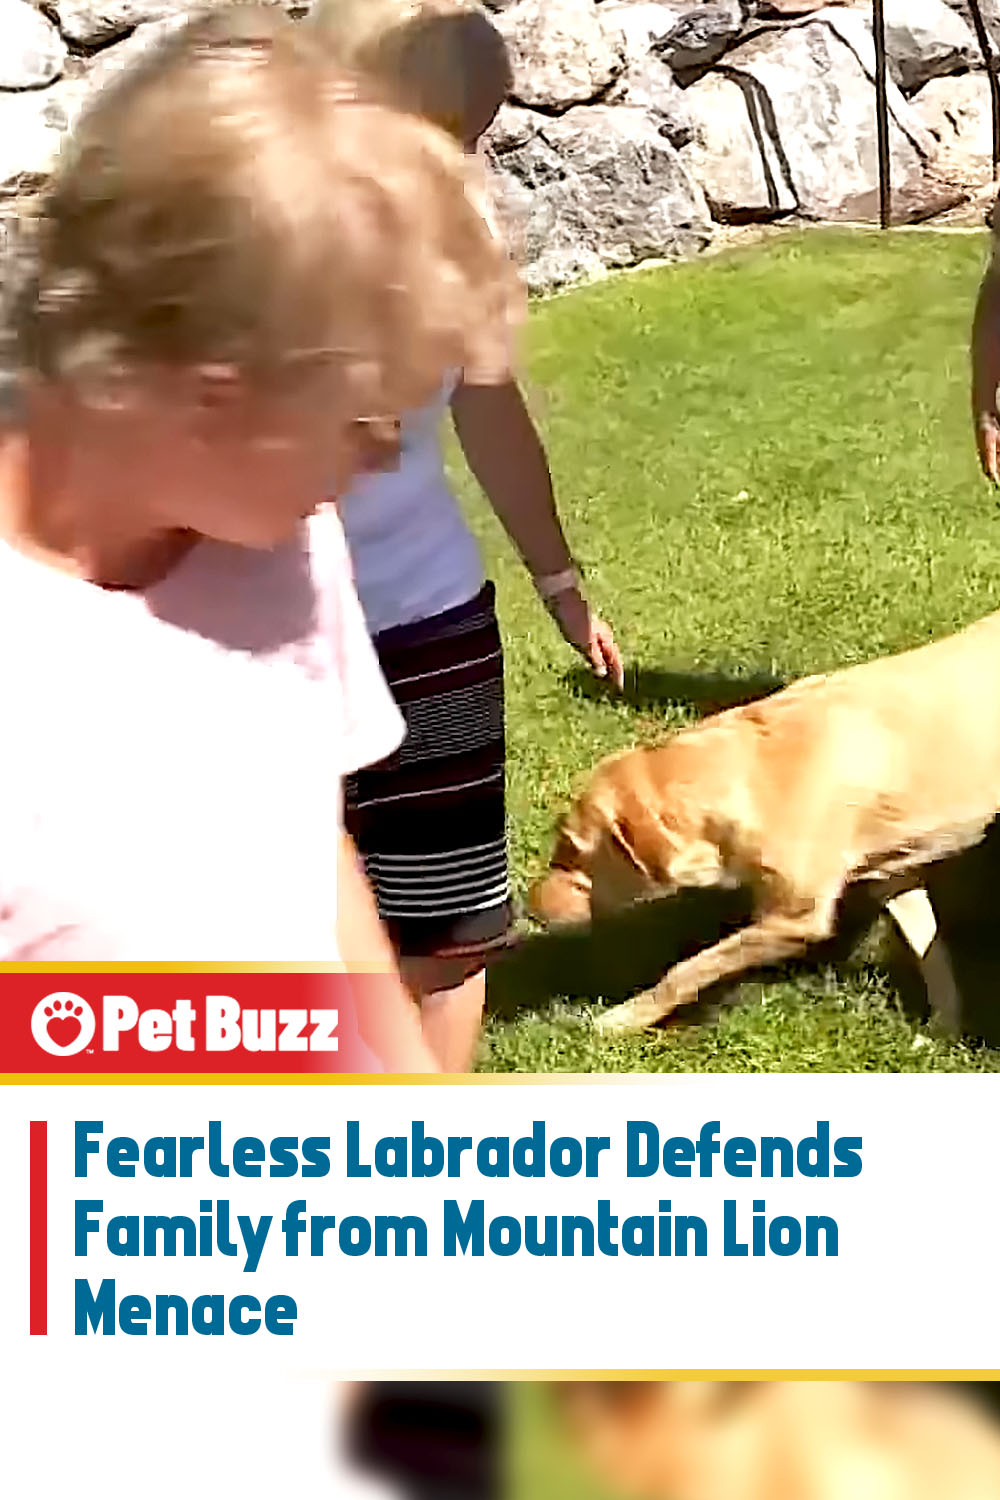 Fearless Labrador Defends Family from Mountain Lion Menace